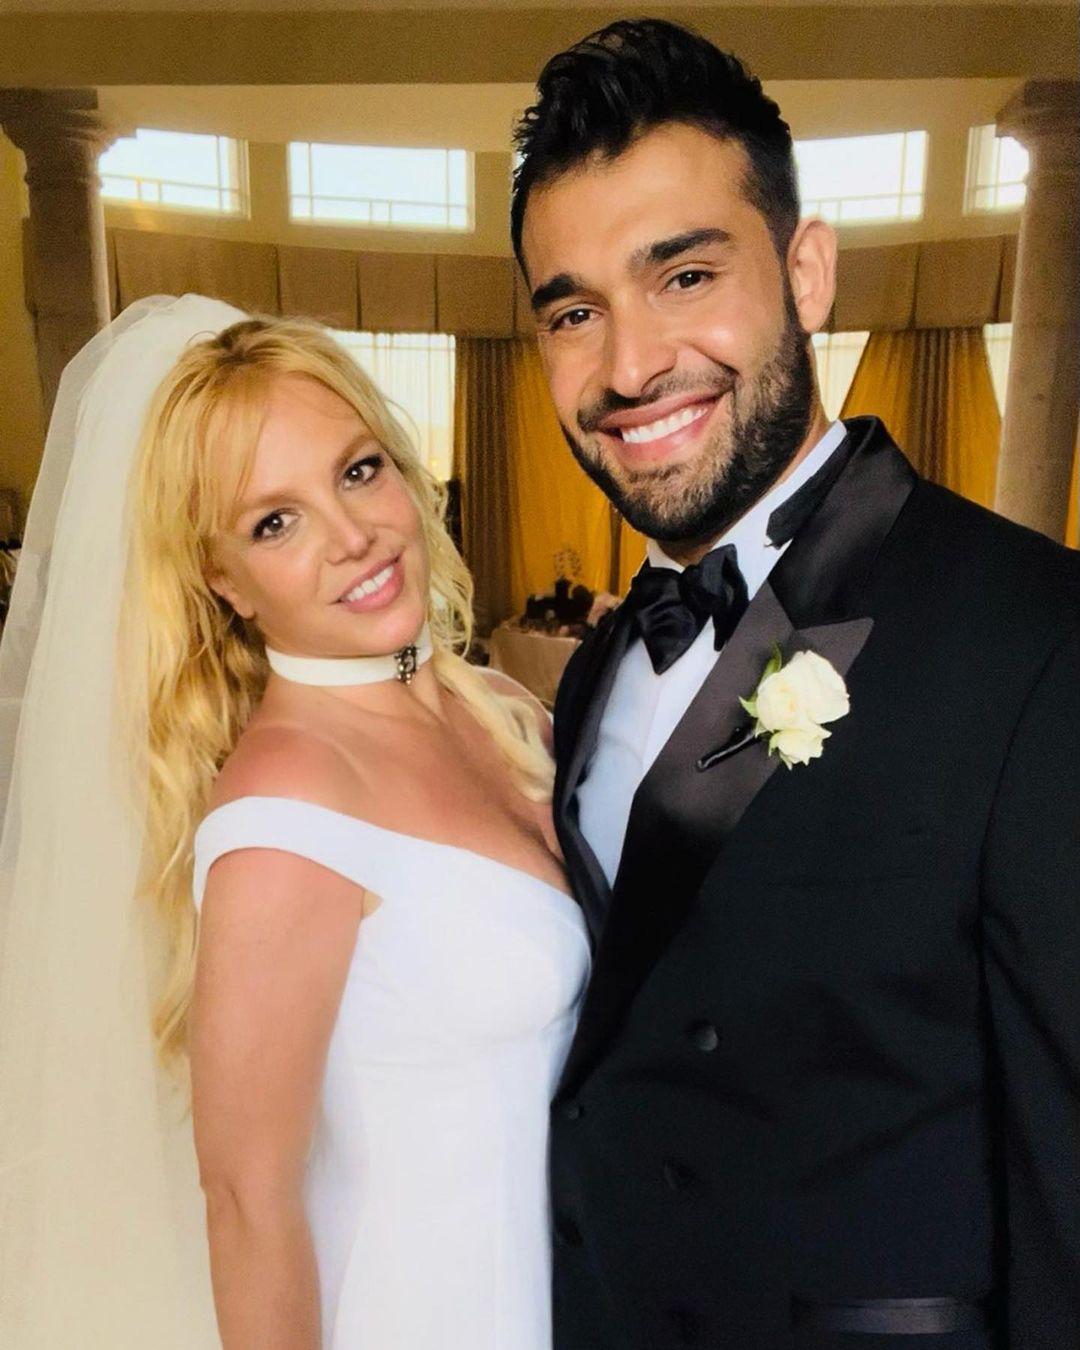 Britney Spears' ex-husband faces three years in prison over marriage crash